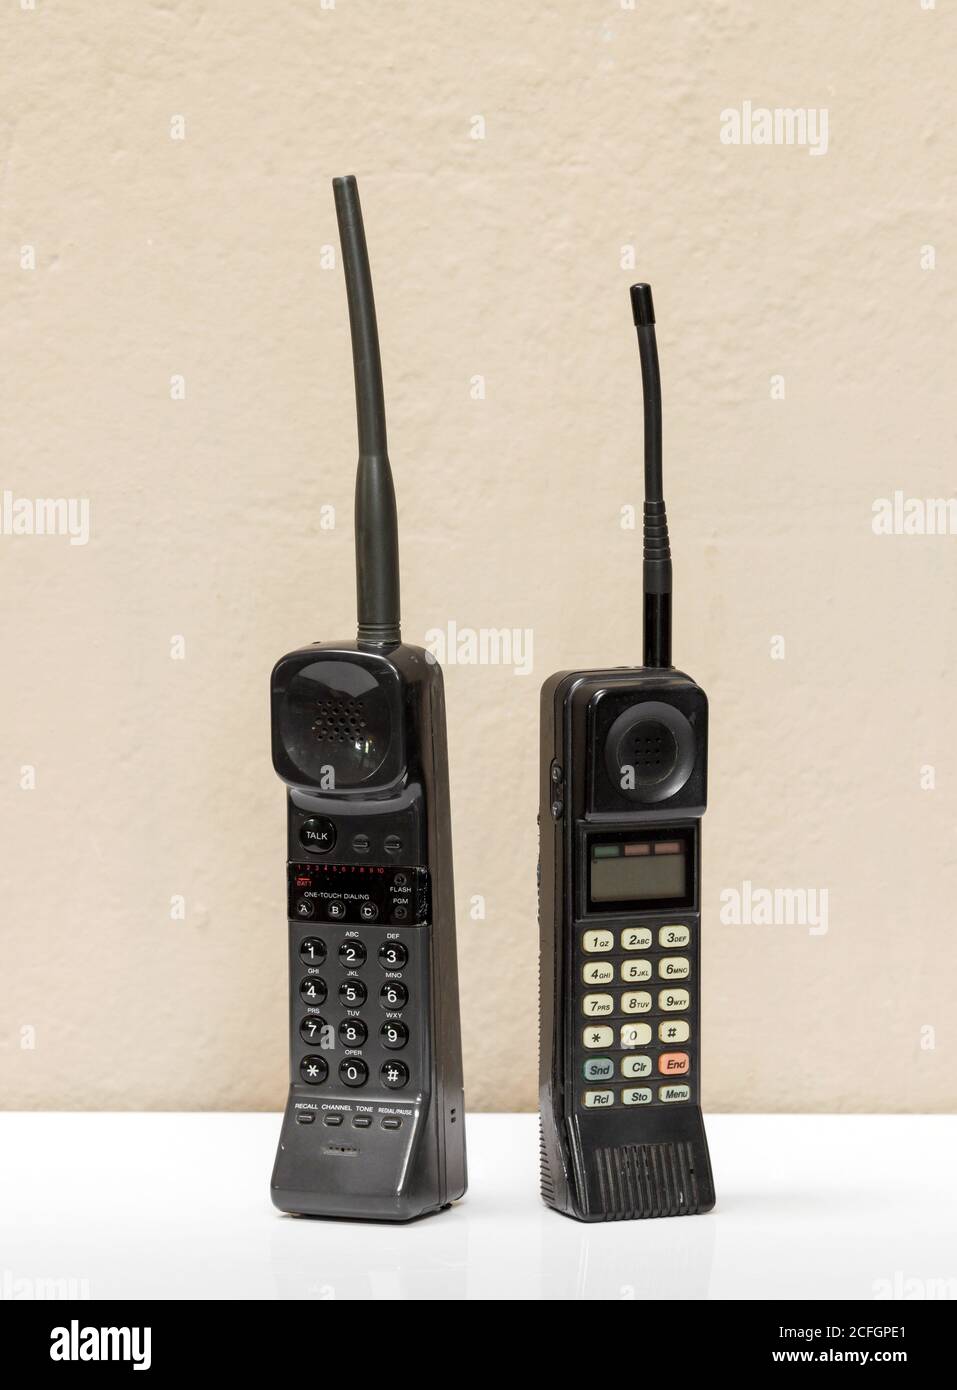 Two old black vintage mobile phones with antennae and numerical keypads standing side by side in a communication concept Stock Photo